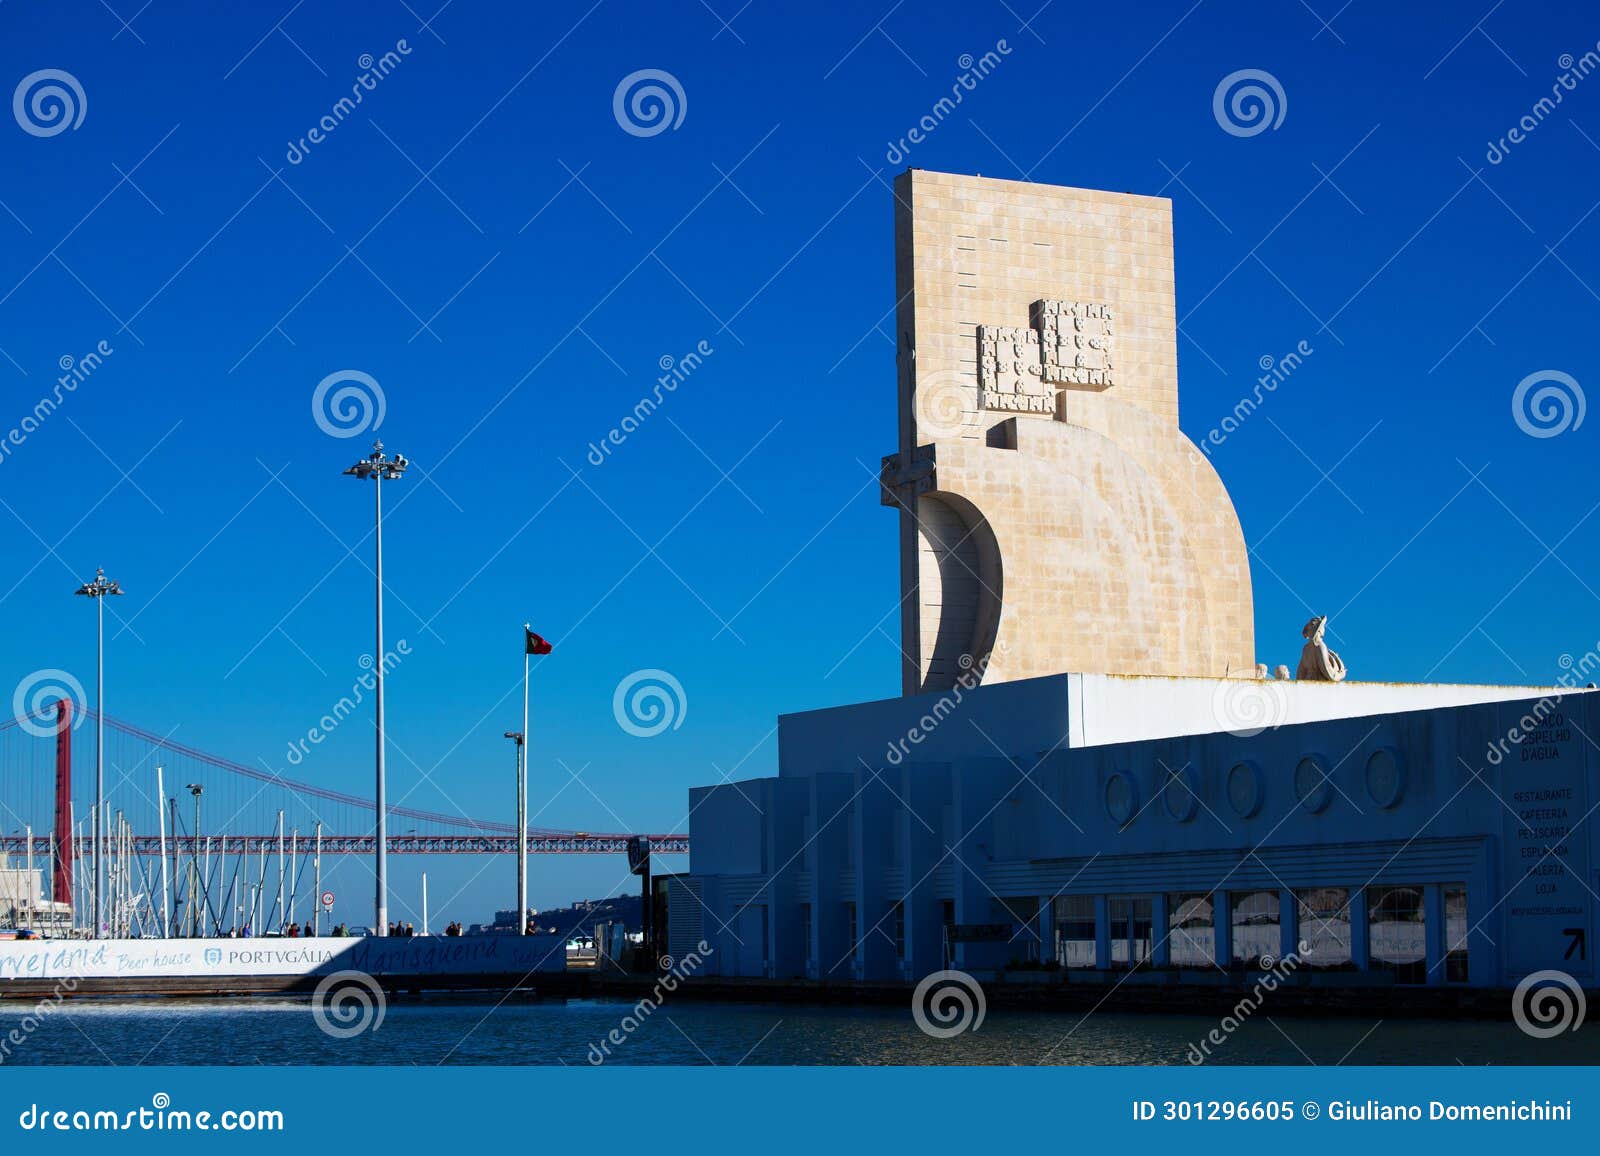 the monument to the discoveries, located in belÃ©m on the bank of the tagus river